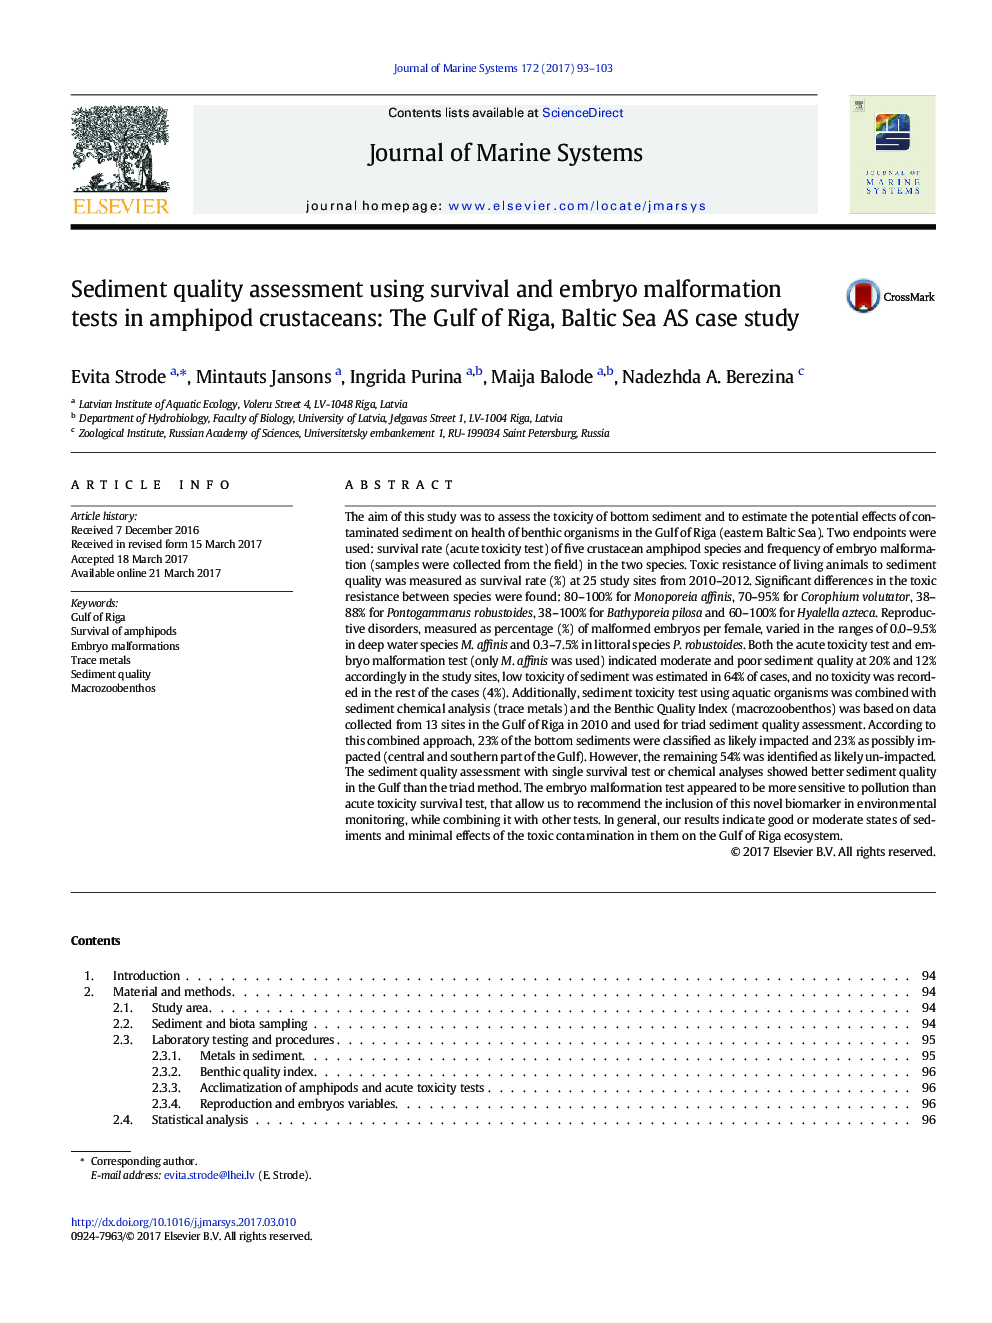 Sediment quality assessment using survival and embryo malformation tests in amphipod crustaceans: The Gulf of Riga, Baltic Sea AS case study